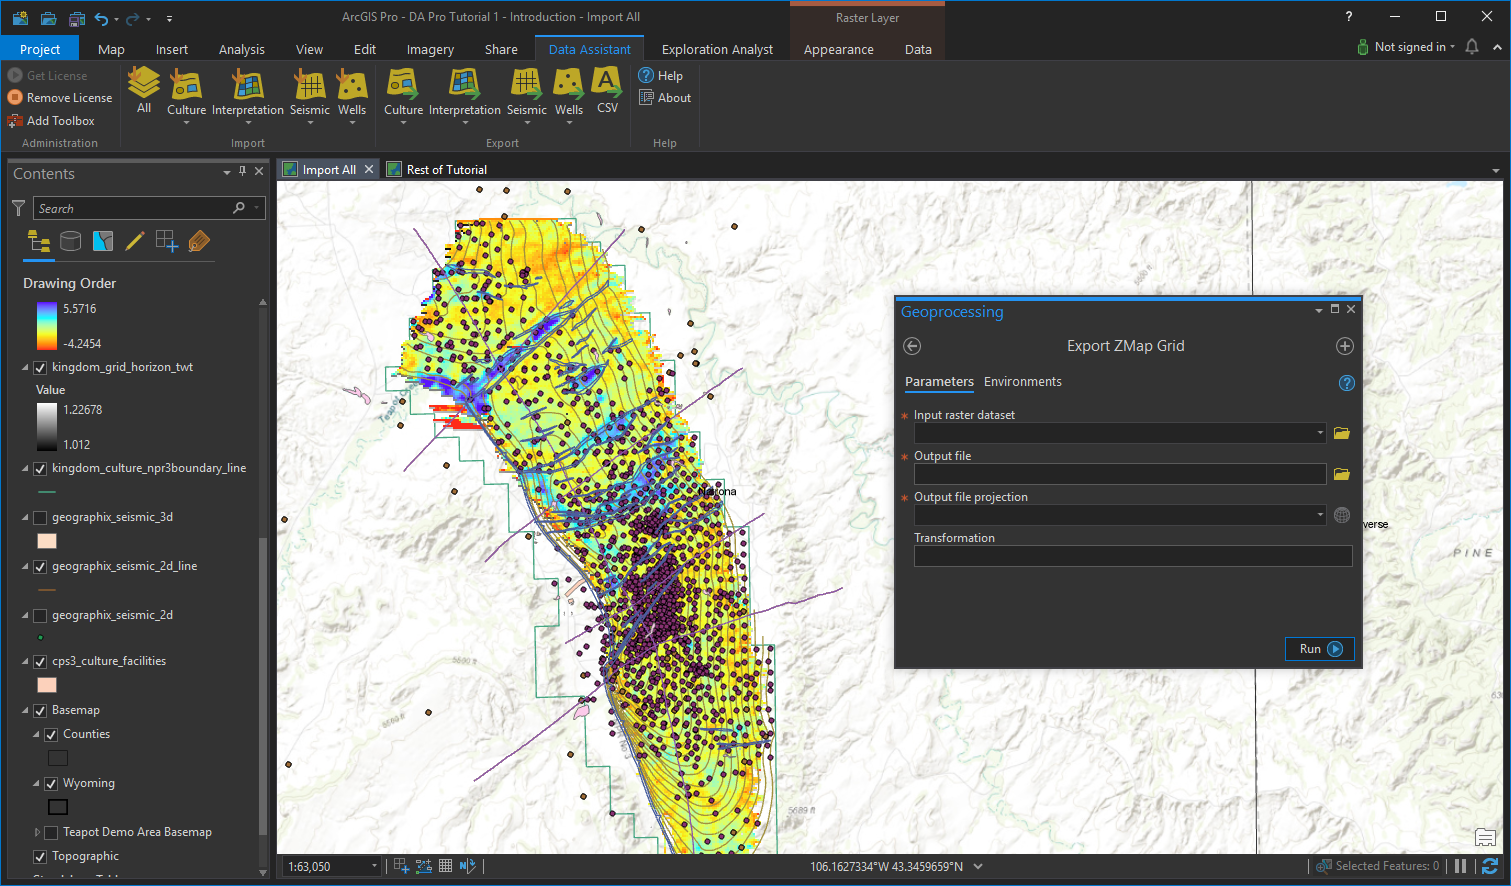 Top 4 Features in Data Assistant ArcGIS Pro Exprodat